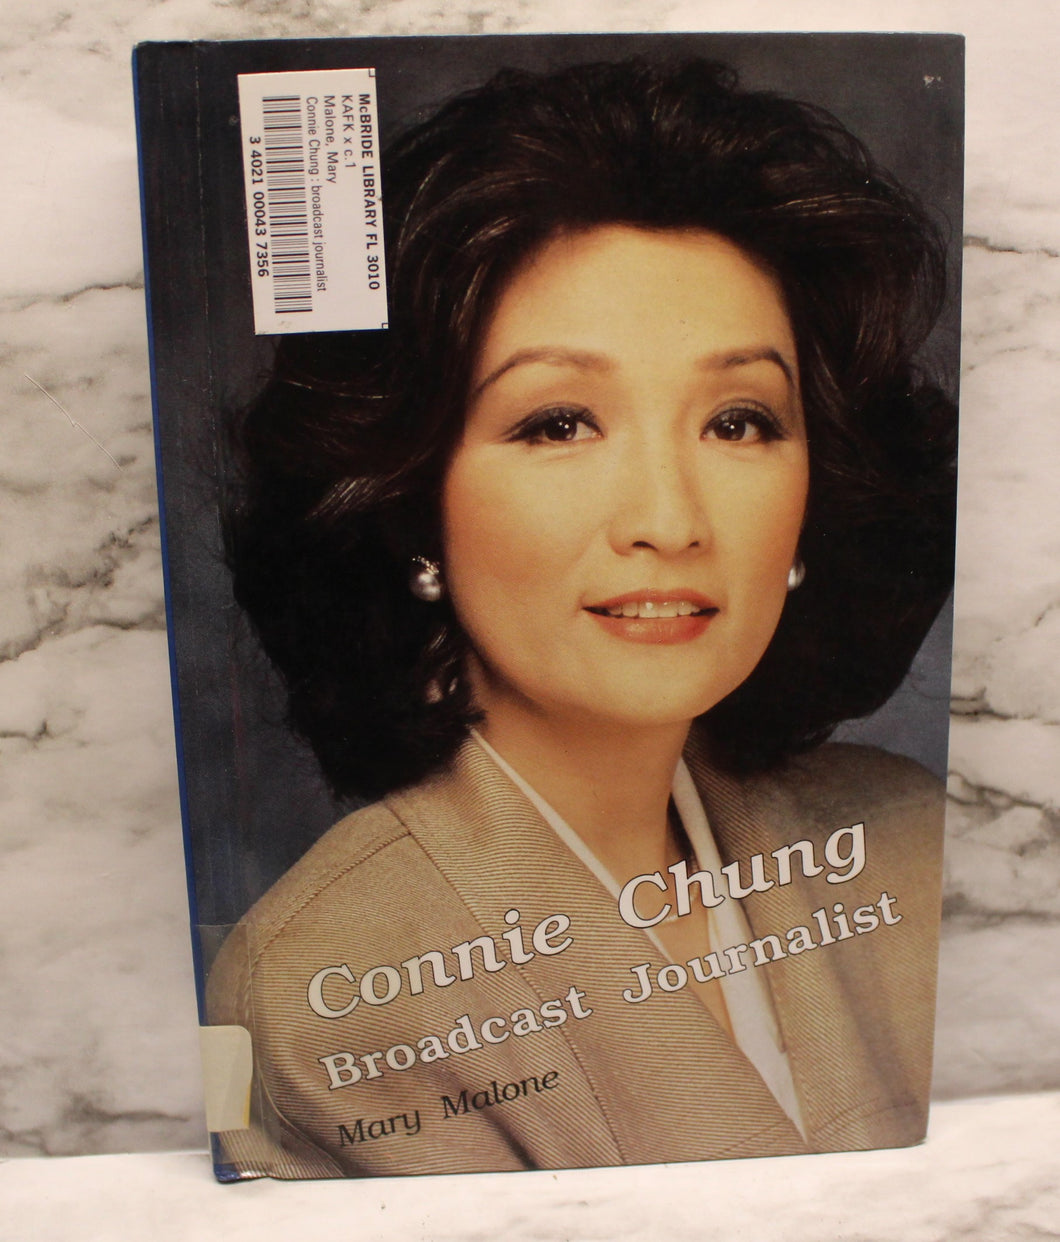 Connie Chung - Broadcast Journalist - By Mary Malone - Used